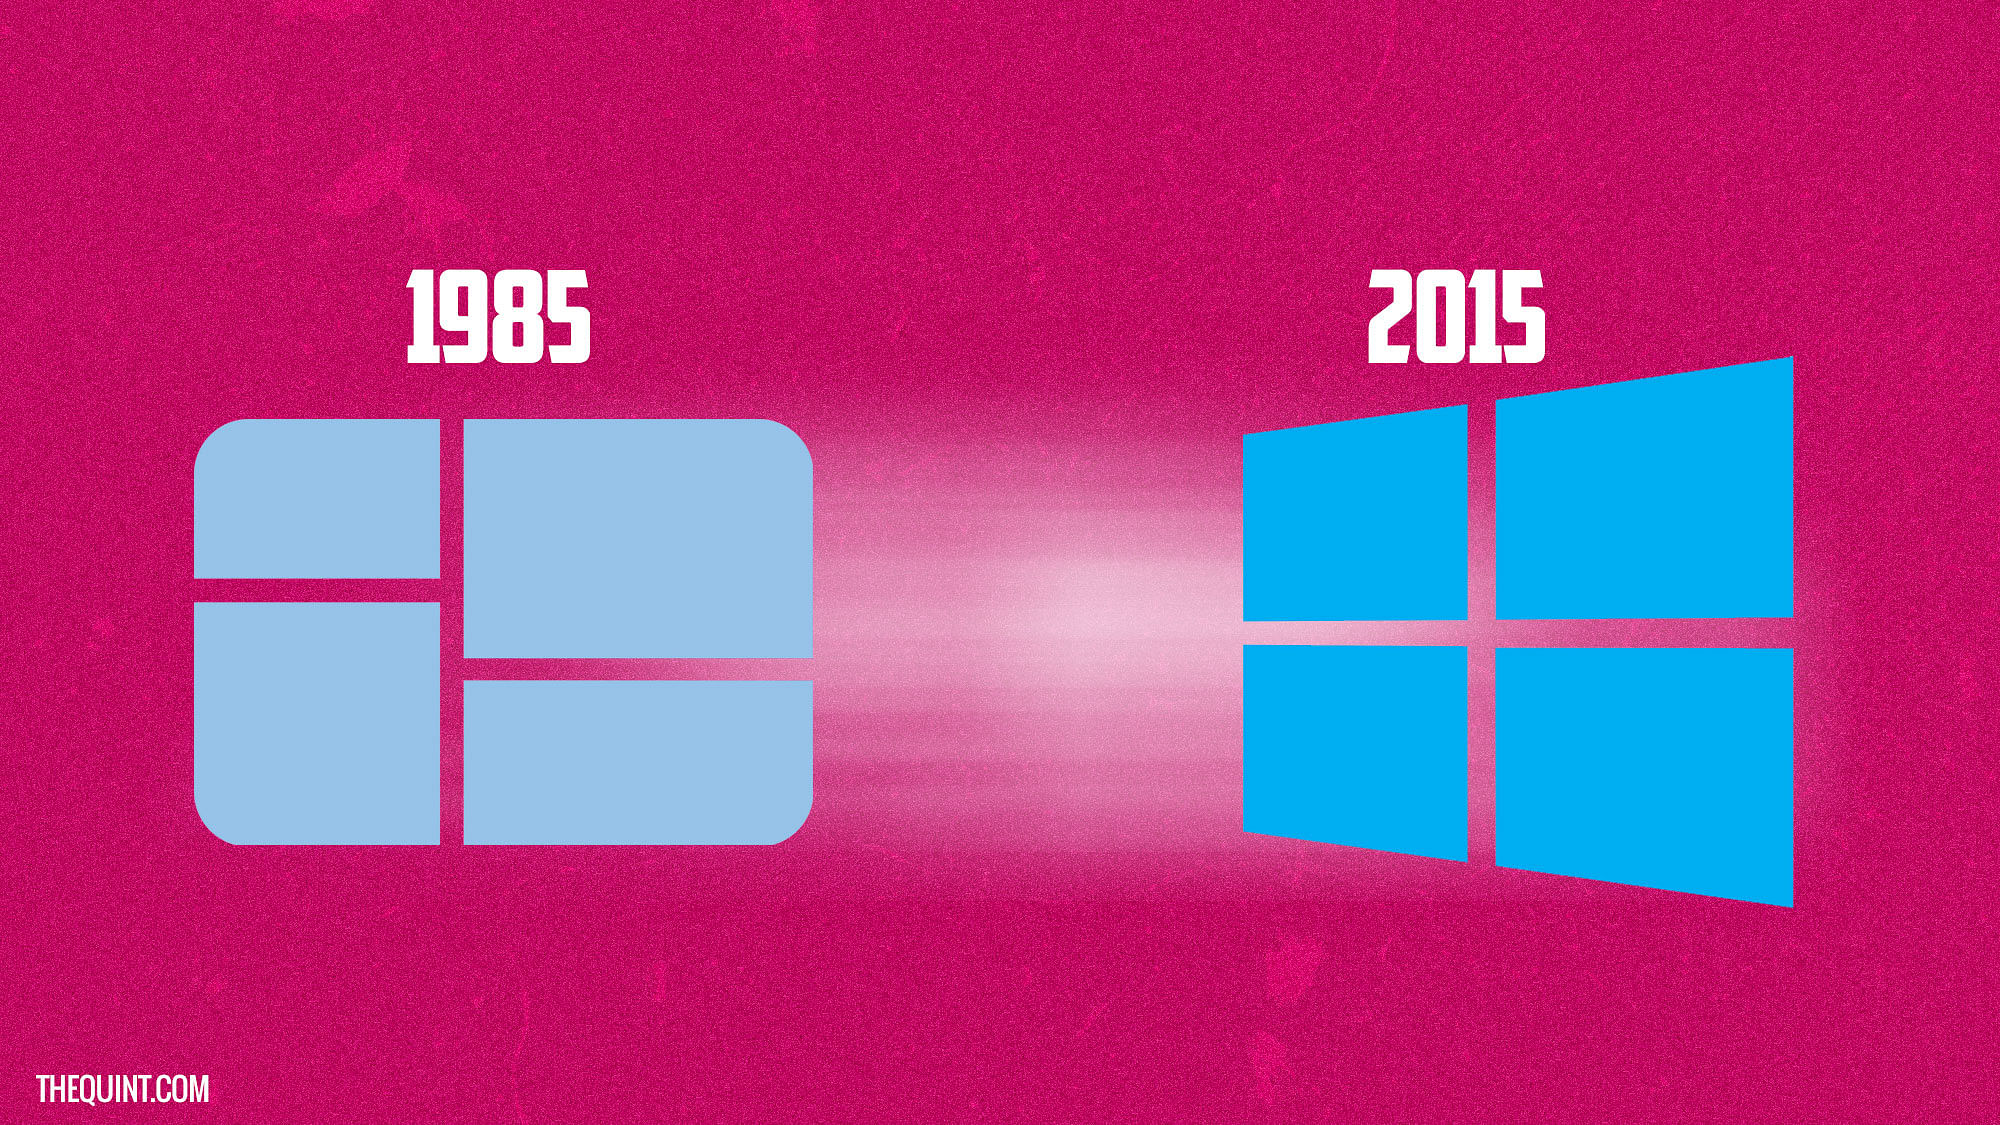 The evolution of Windows from 1985 to 2015